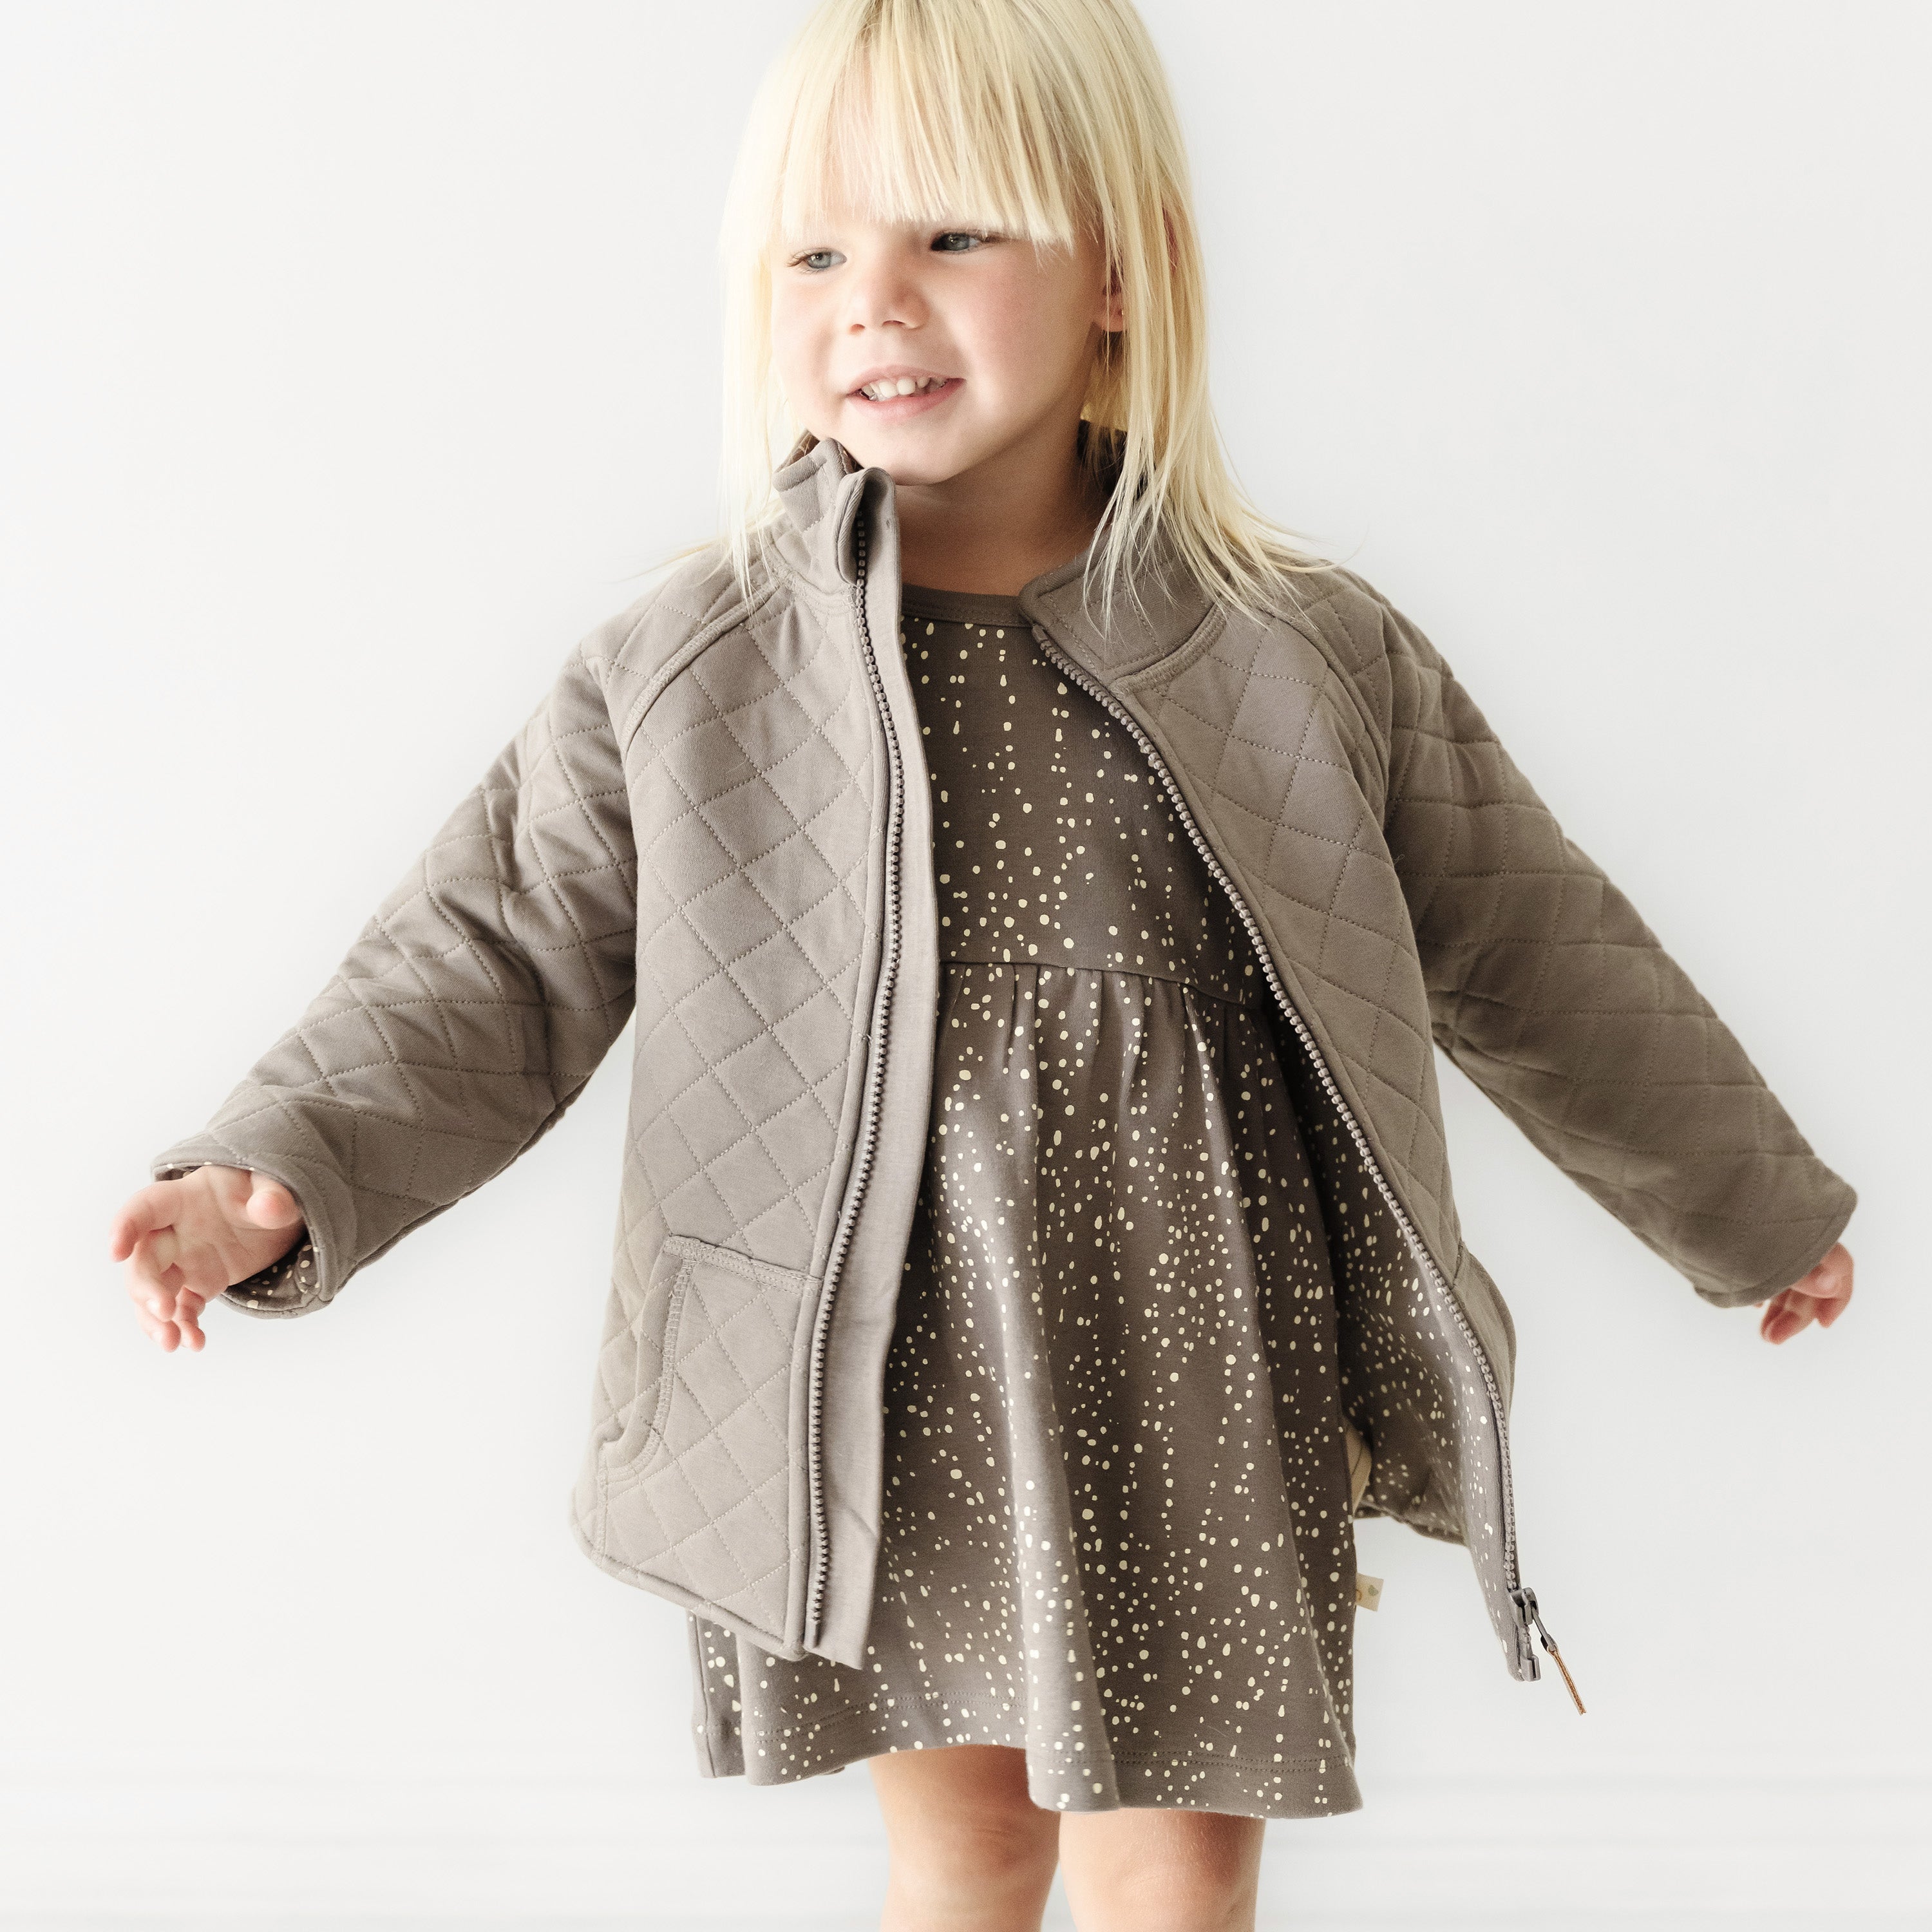 A young child with blond hair smiling and wearing a gray quilted jacket from Organic Kids over a dotted dress, standing against a white background.